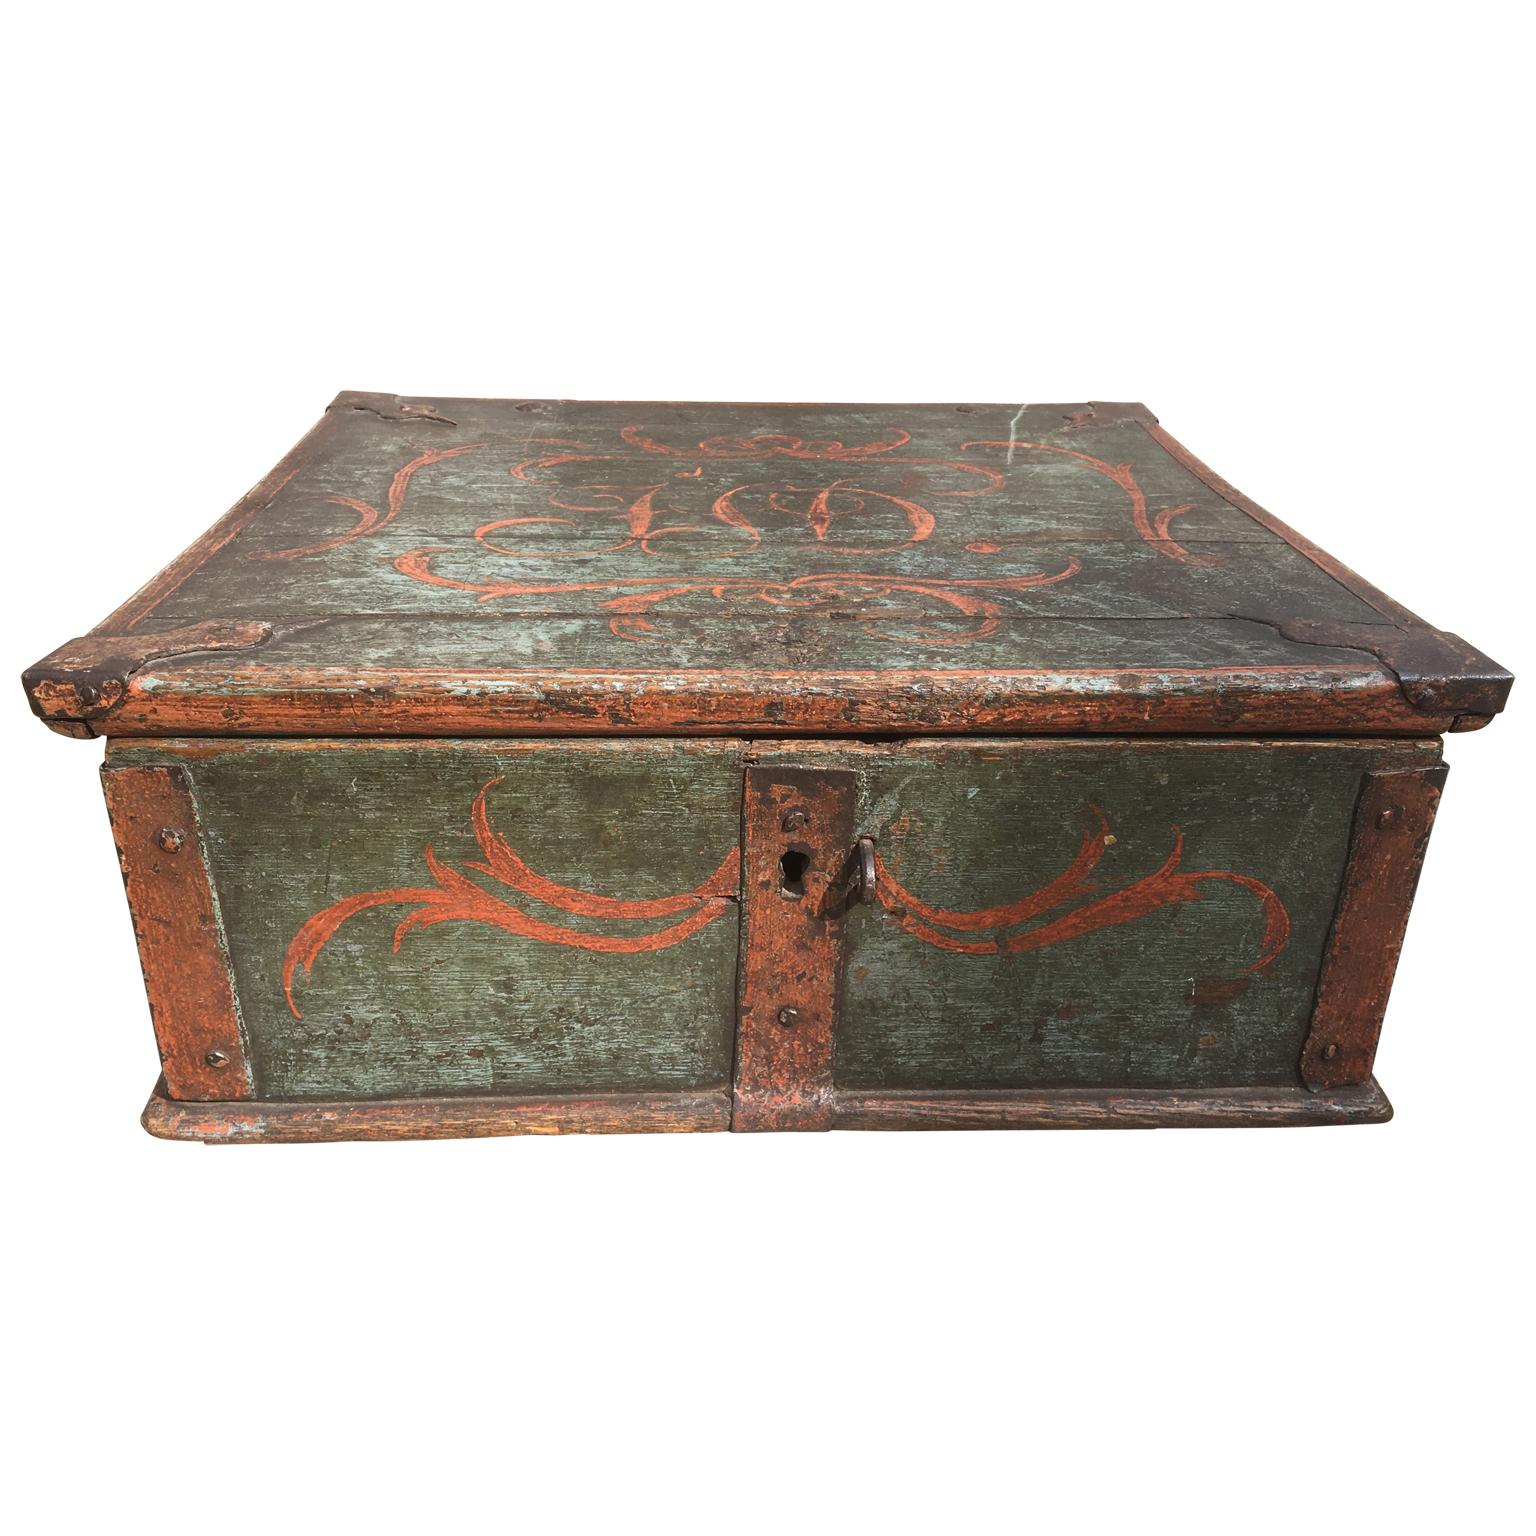 Swedish 19th century wooden monogrammed and dated Folk Art box, 1830.

An original painted box with beautiful green and red colors, combined with Rococo style rocaille painting decoration dated 1830.

Please note that this item is located in